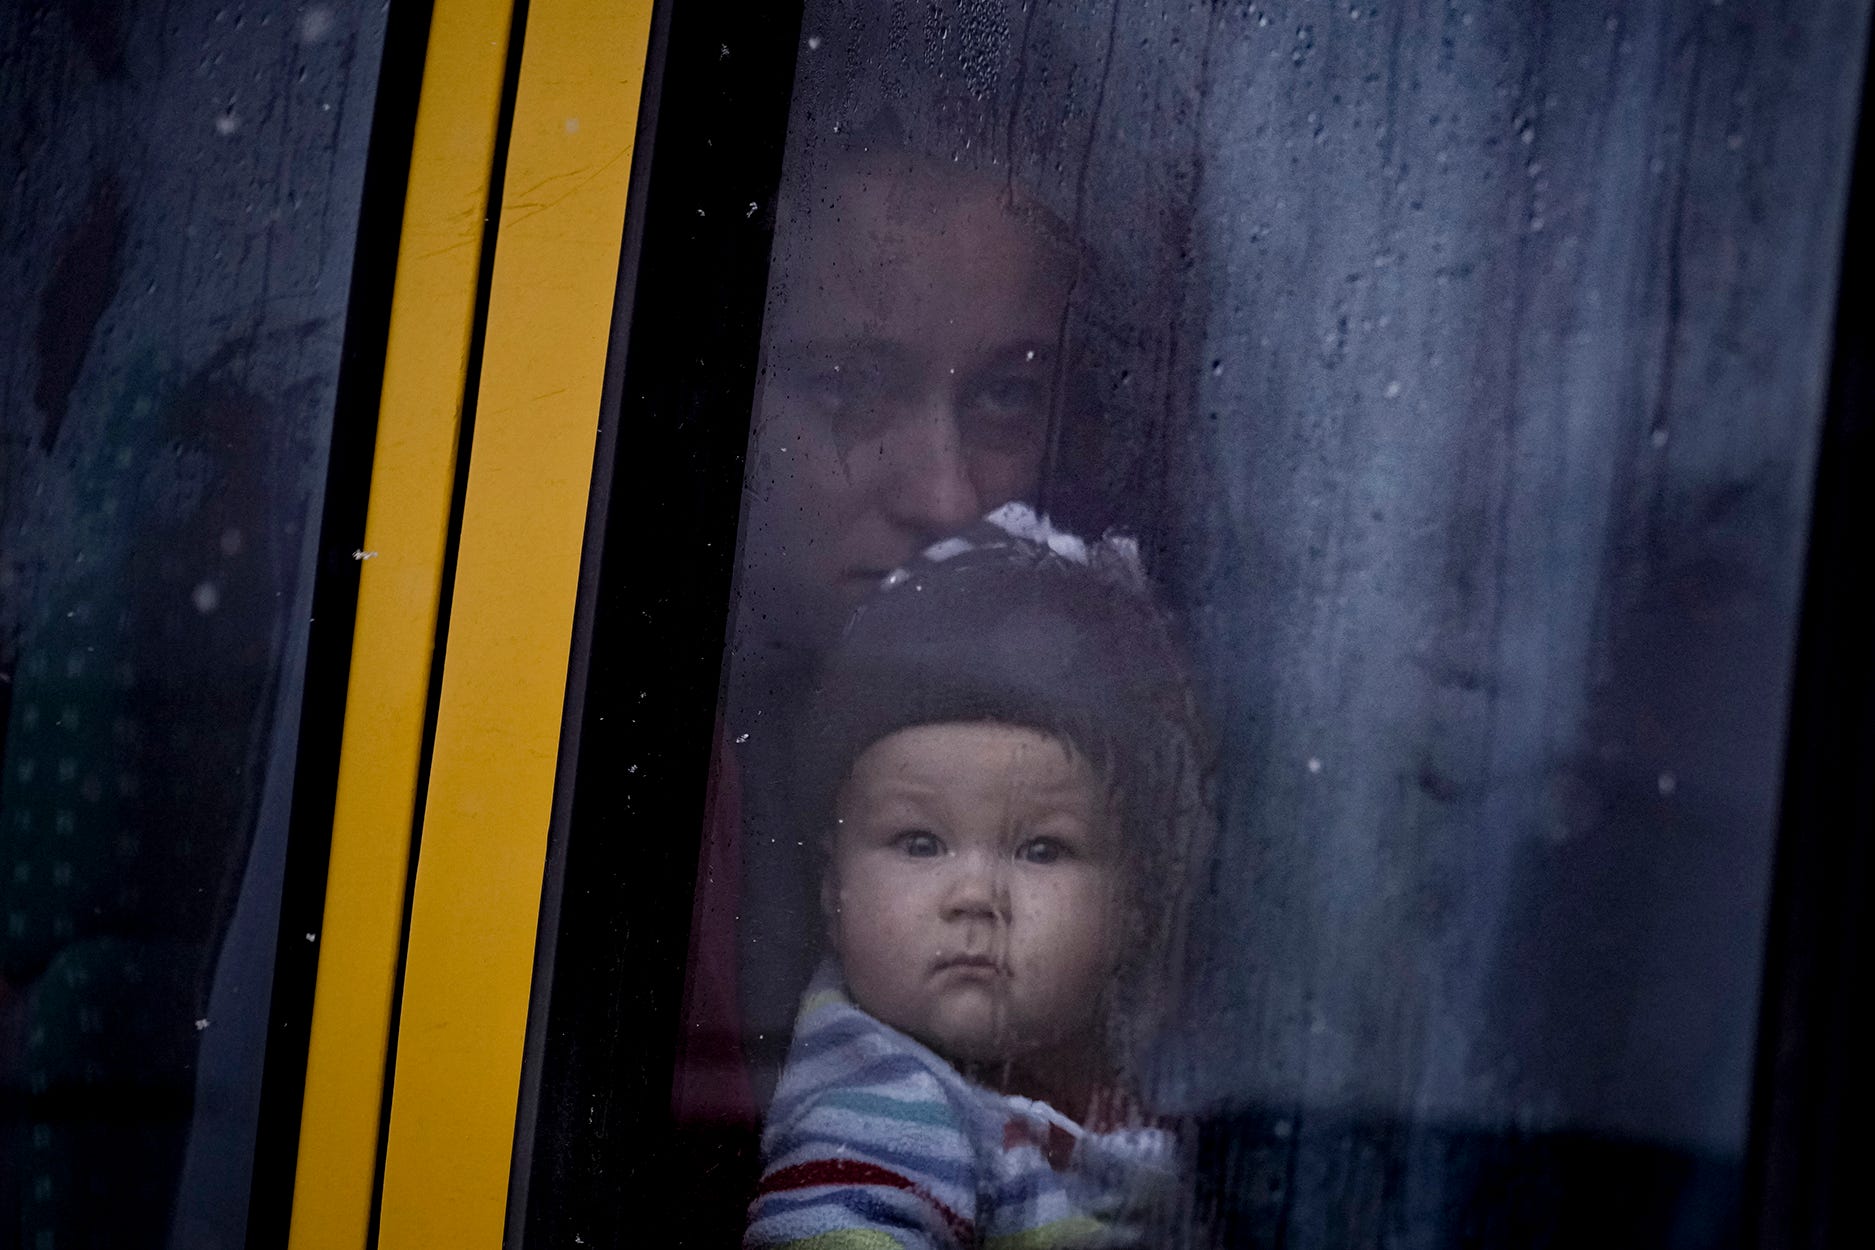 A woman and child, who were evacuated from areas on the outskirts of the Ukrainian capital, look out the window of a bus after arriving at a triage point in Kyiv, Ukraine, Weds., March 9, 2022. (AP Photo/Vadim Ghirda)